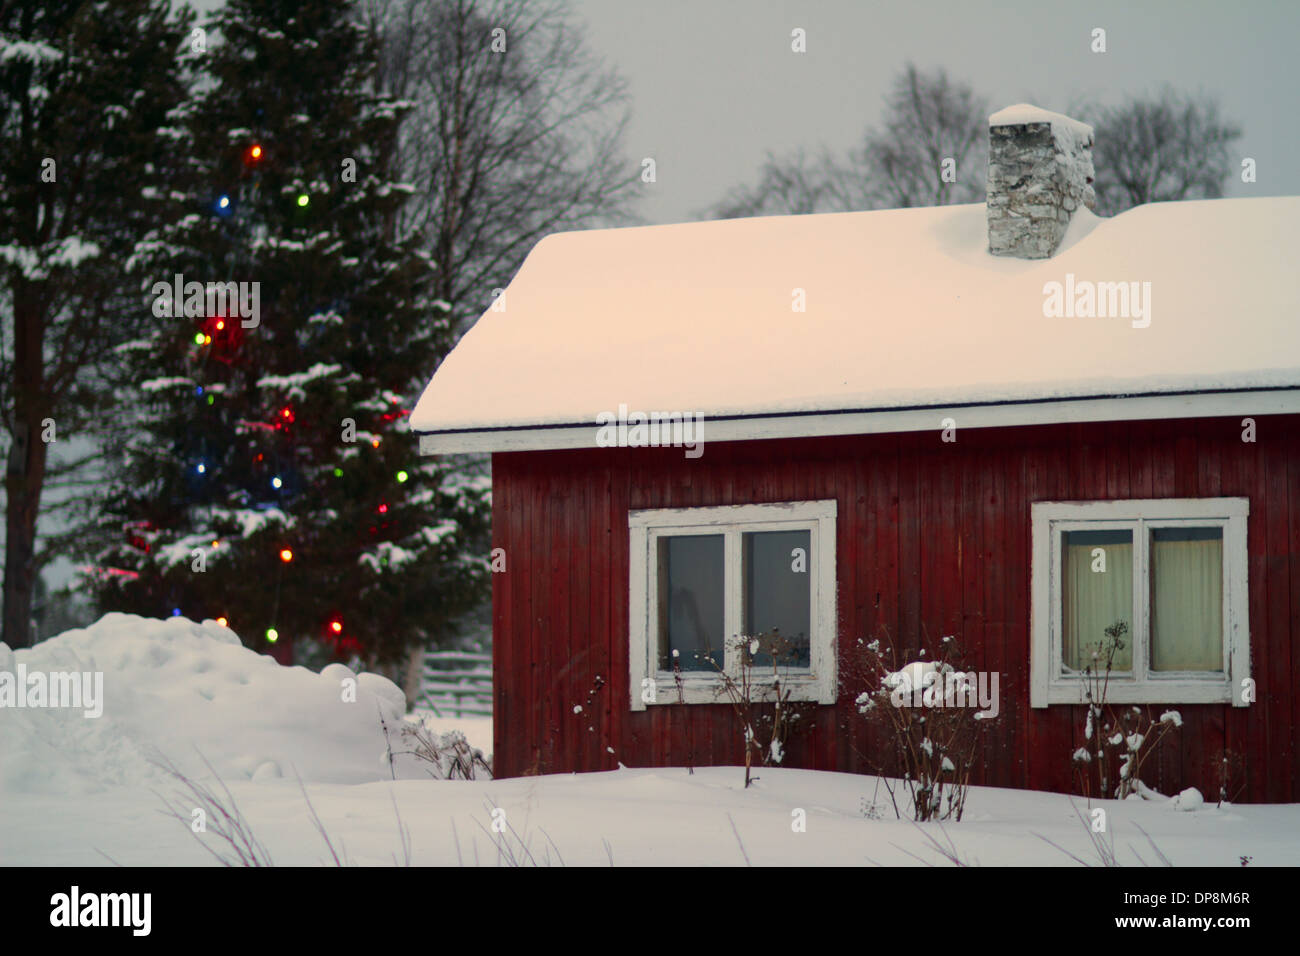 wooden house red with Christmas feeling in the nordic winter with snow Stock Photo